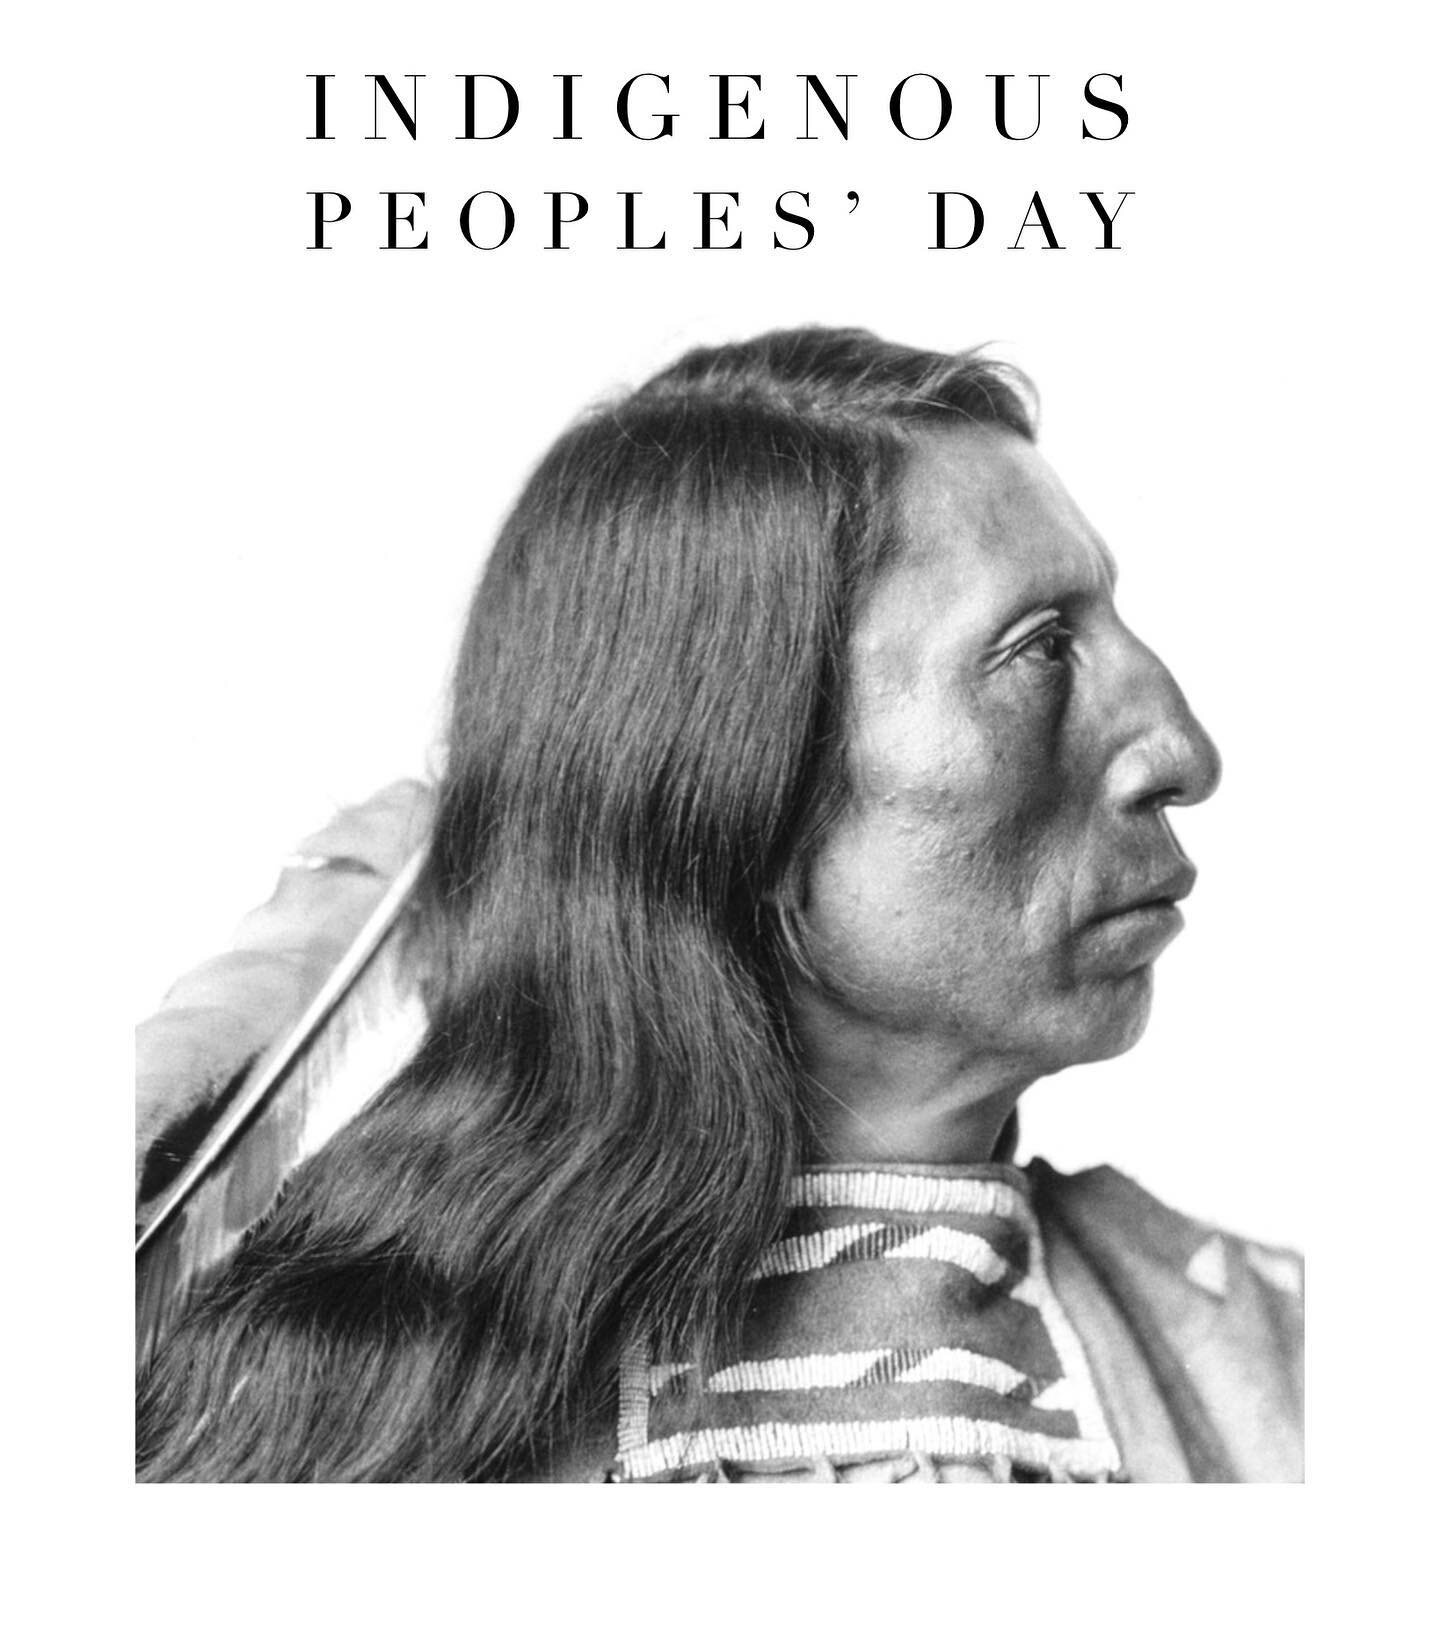 Most of us got to sleep in and will enjoy a day off of work as a result of Indigenous Peoples&rsquo; Day. But many of us are clueless that this nation was born out of the genocide of Indigenous Americans or the legacy of colonialism that Native popul